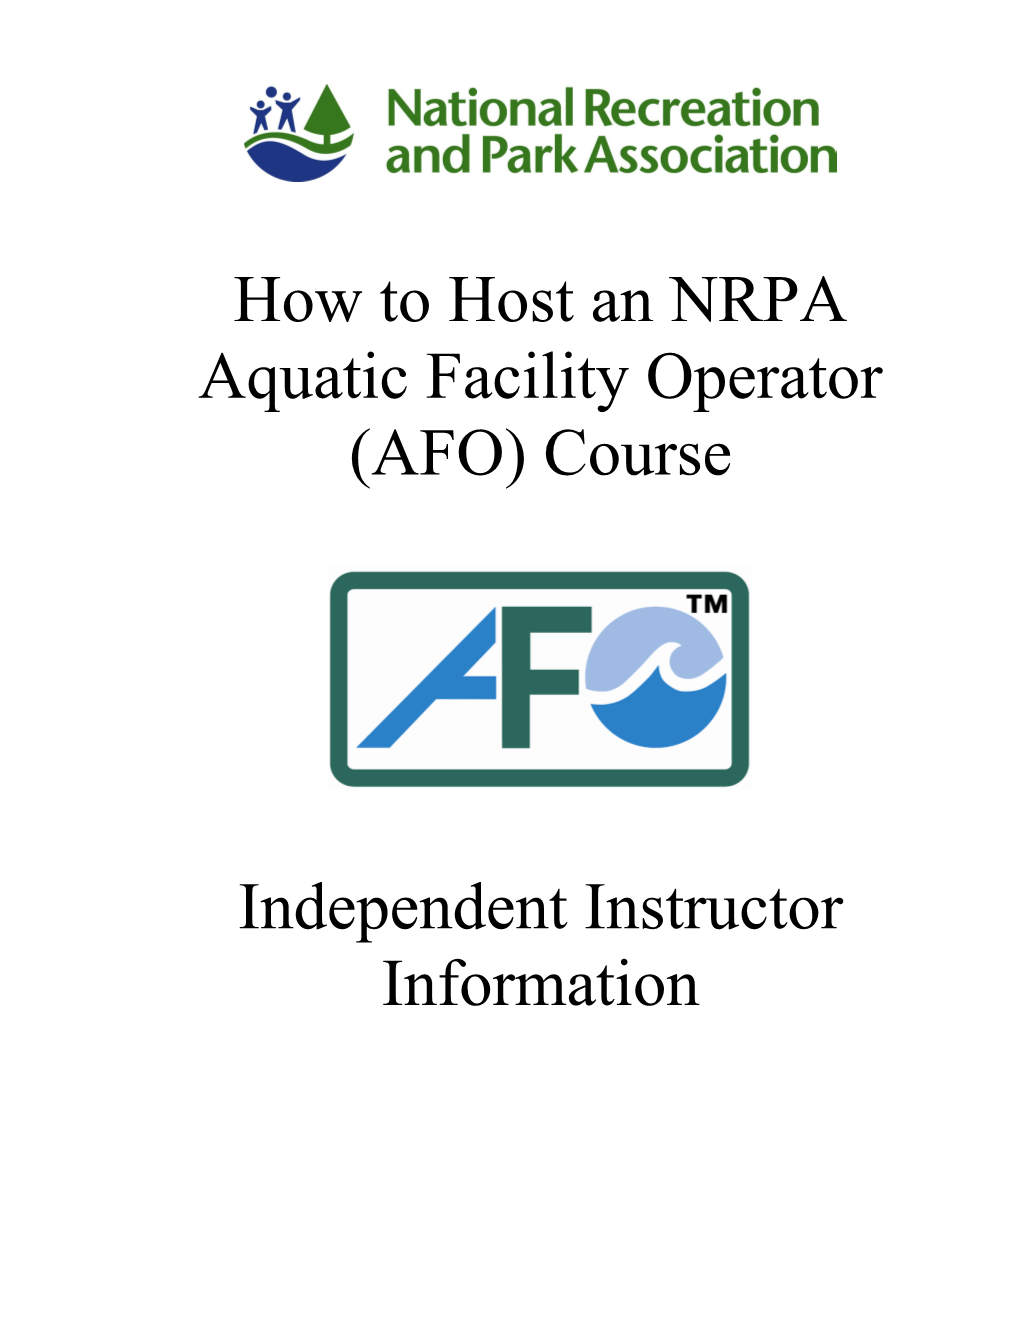 HOW to HOST an NRPA AQUATIC FACILITY OPERATOR COURSE Independent Instructors